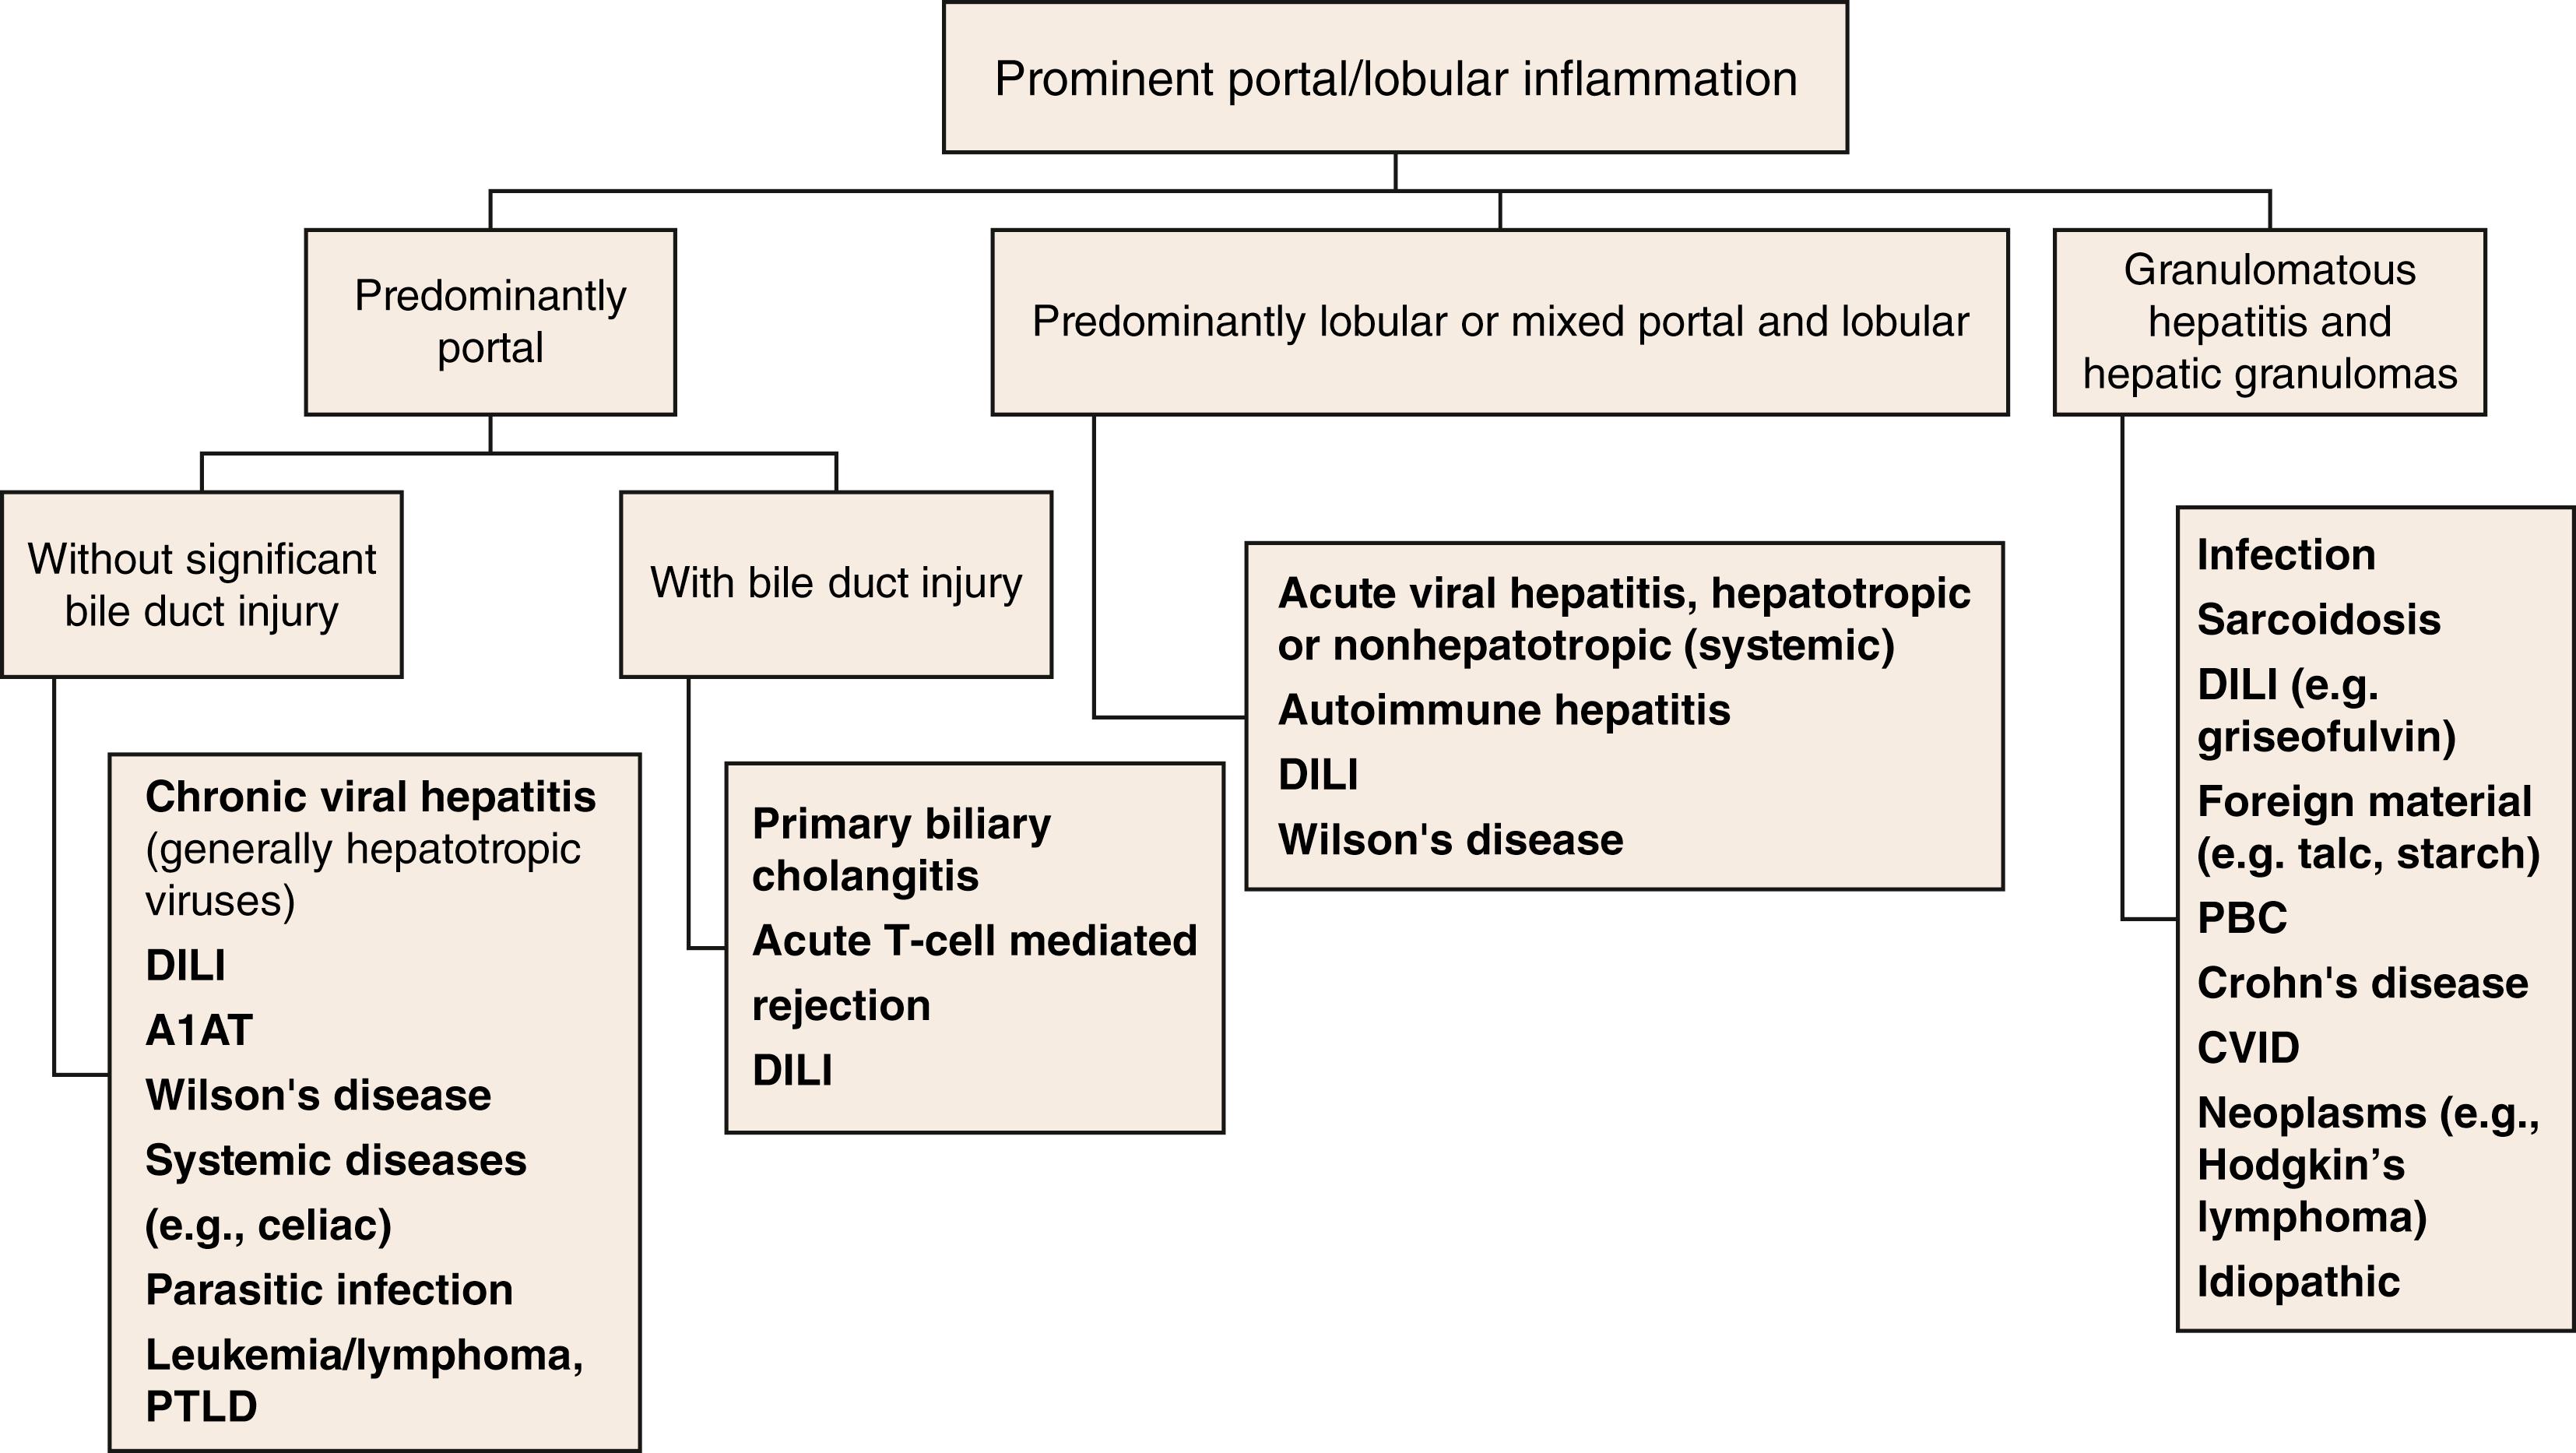 FIGURE 43.2, Algorithm for determining the predominant location of inflammation.